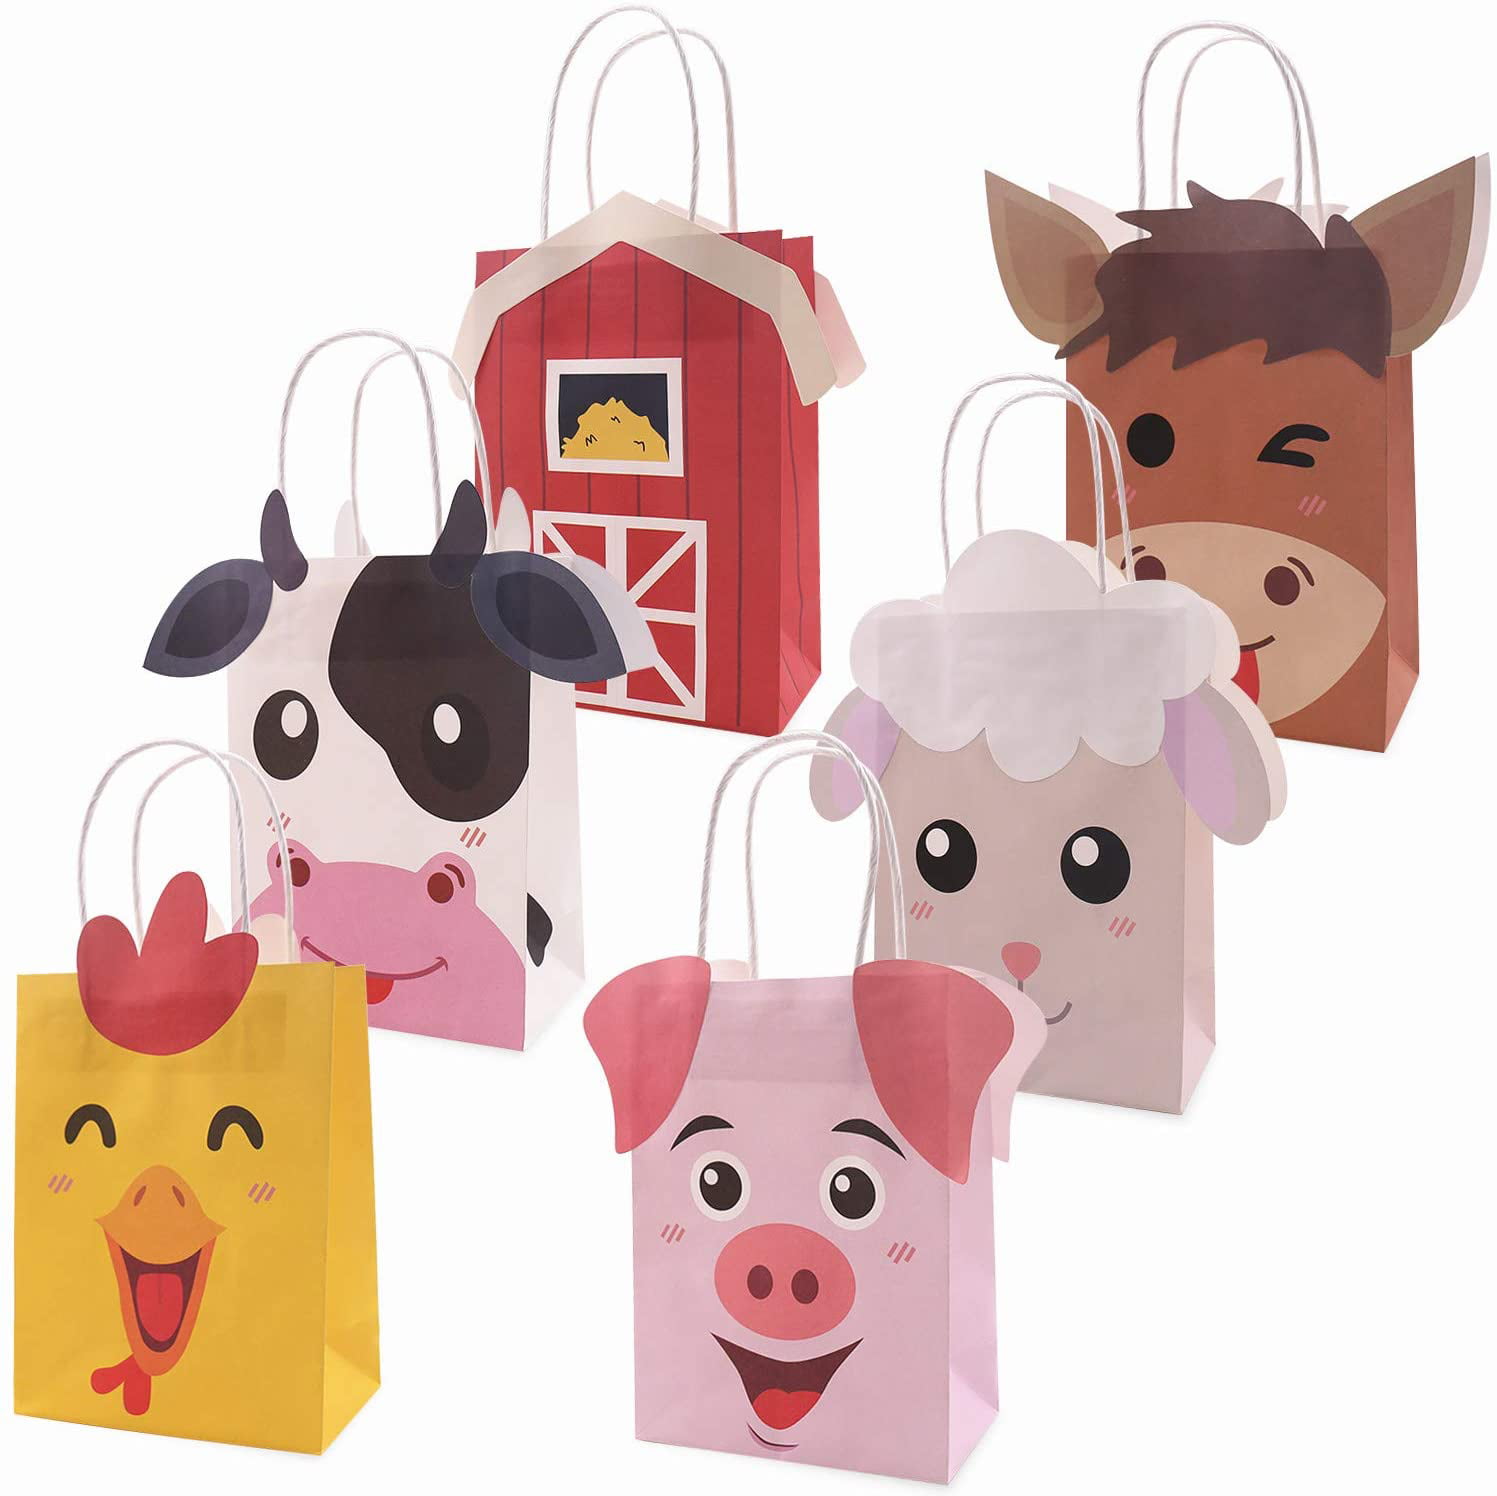 12 Mini Farm Animal Figures Goodie Loot Pinata Party Bag Fillers Favour Gift 